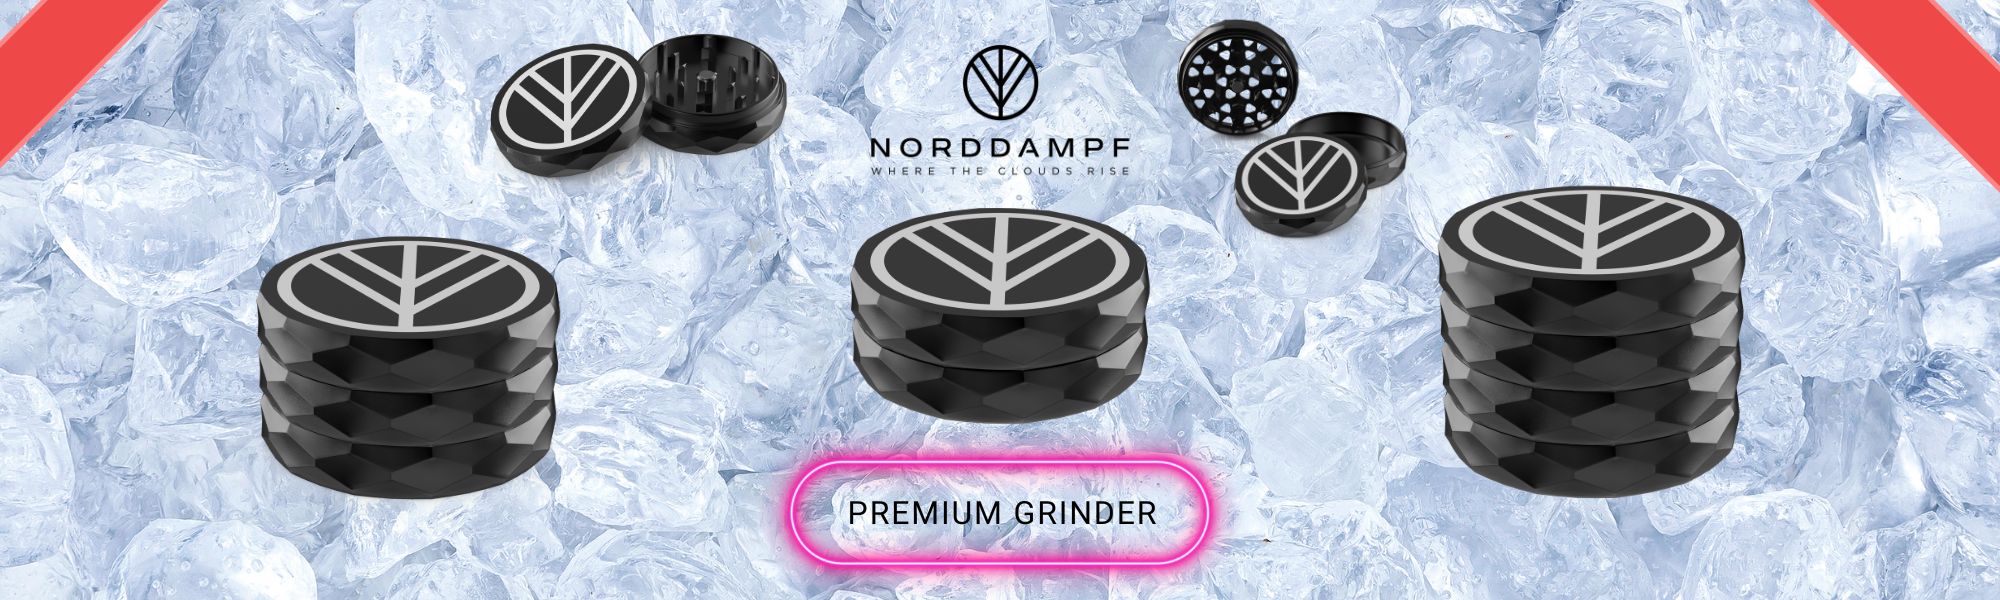 Norddampf Relict Vaporizer